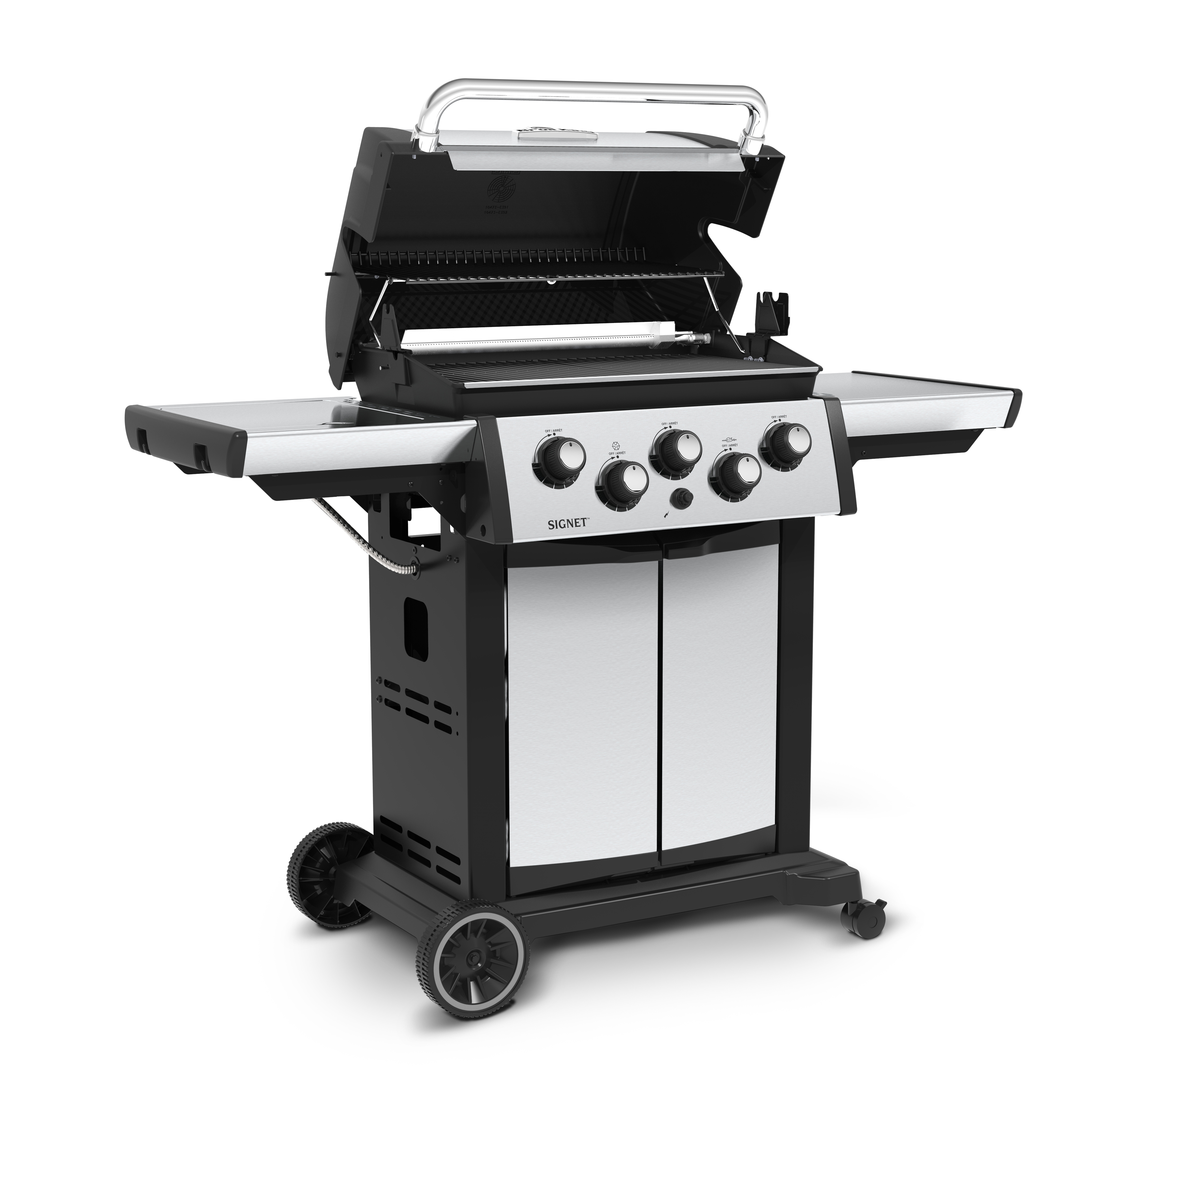 Broil King Signet 390 – Luxe Barbeque Company